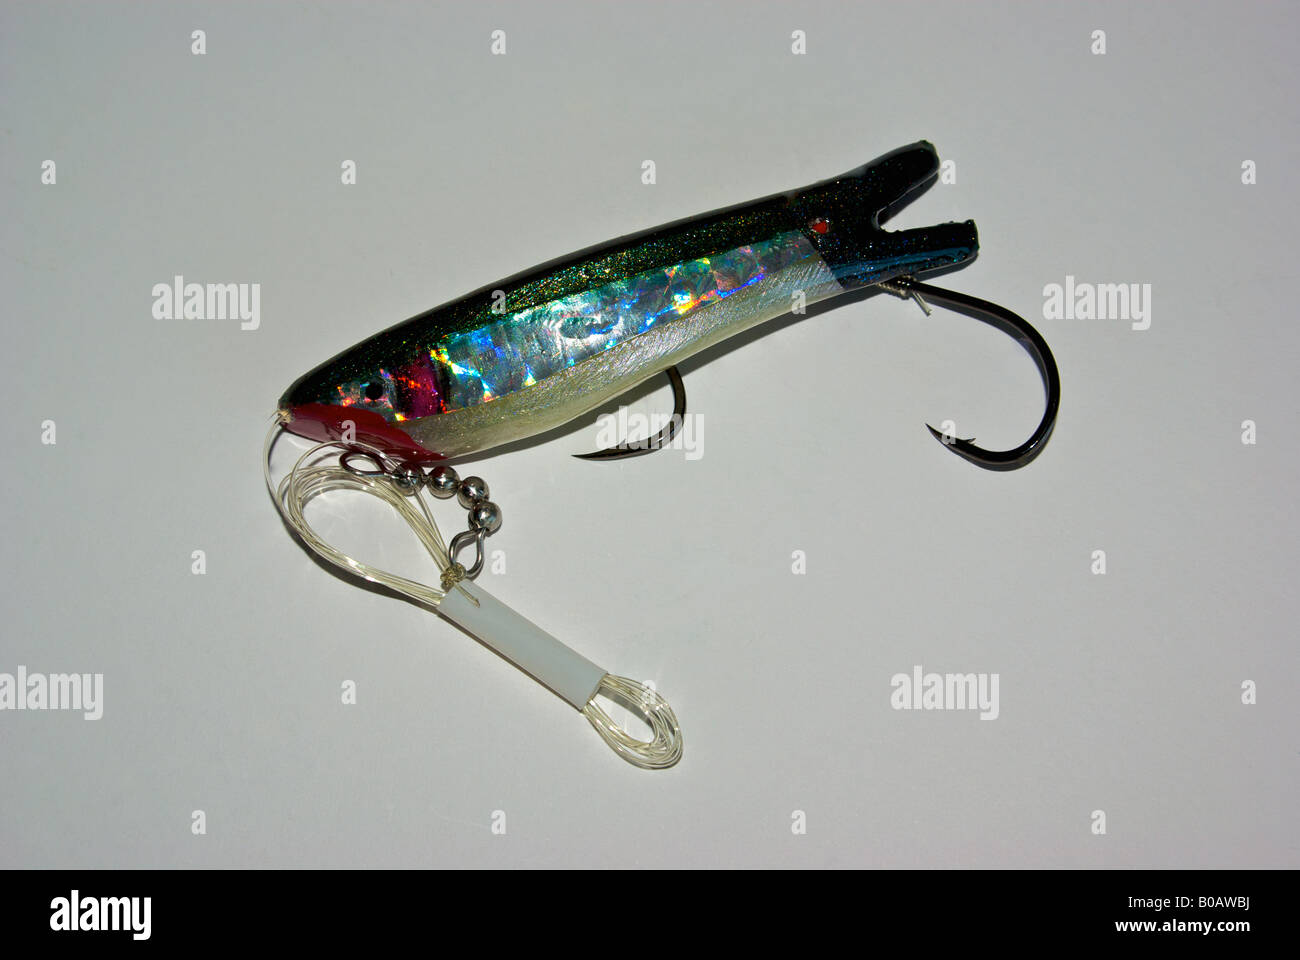 True Roll trolling fishing lure attracts salmon bottom fish and